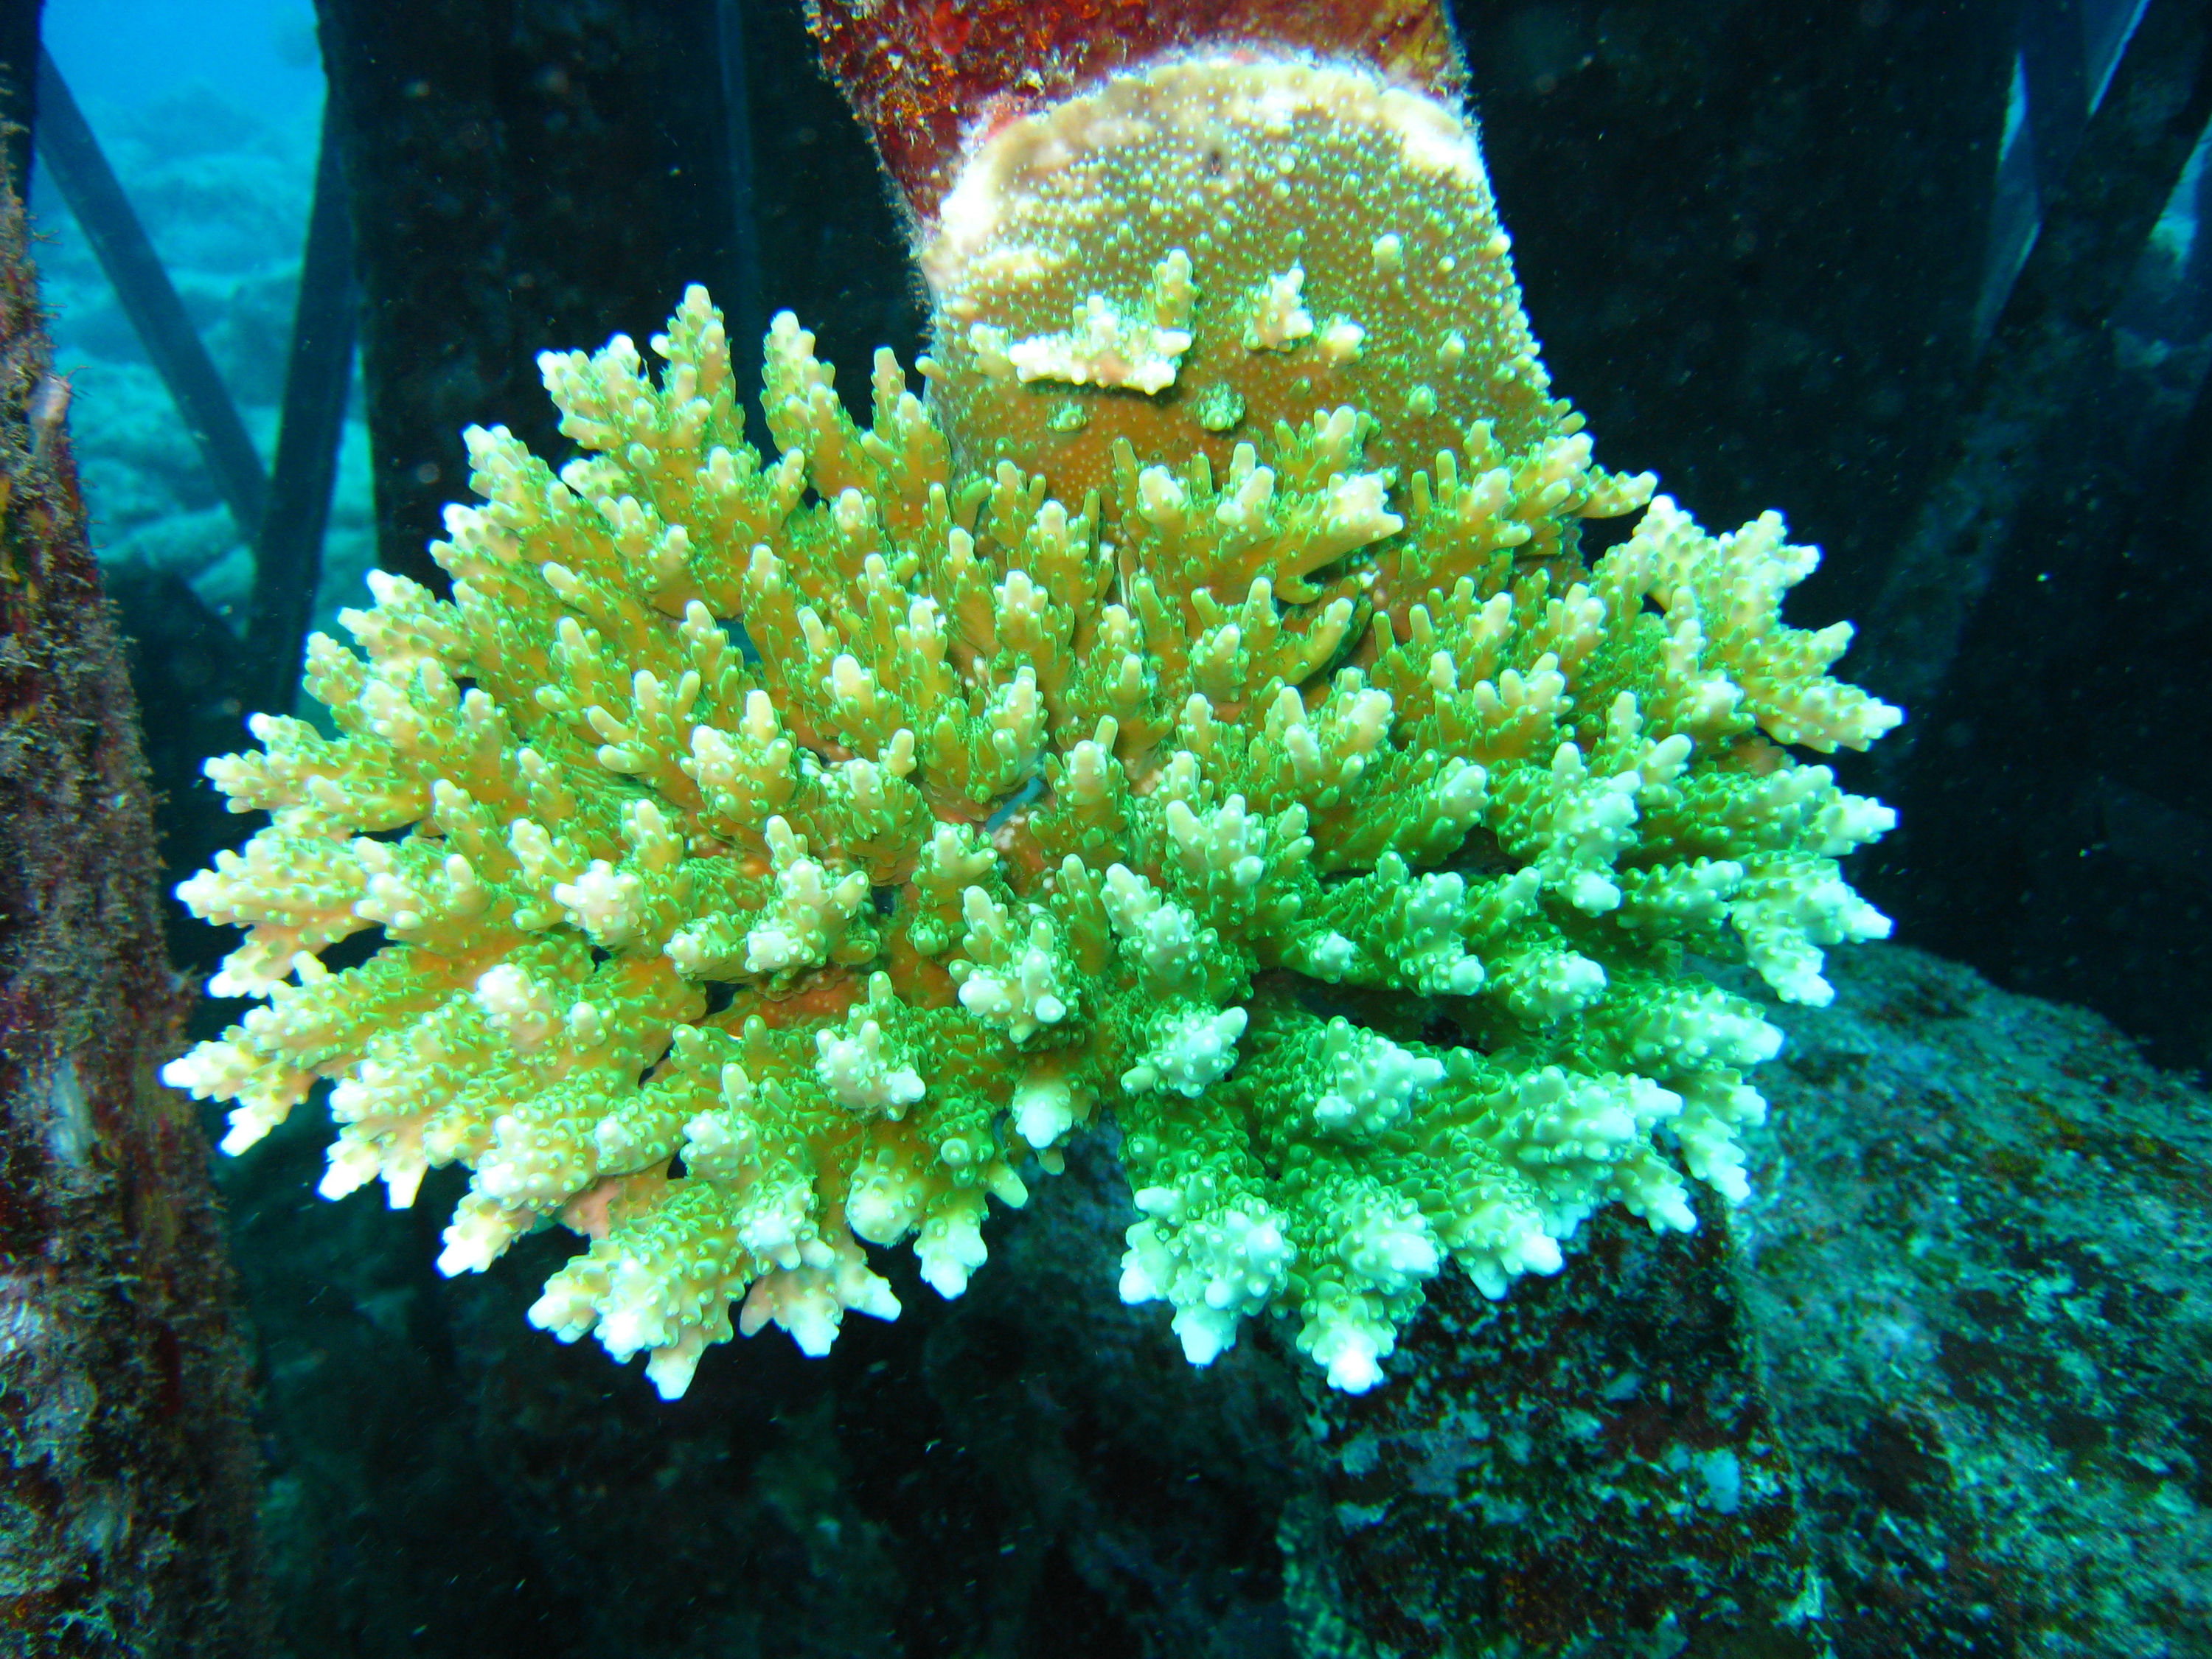 Fluorescent green coral